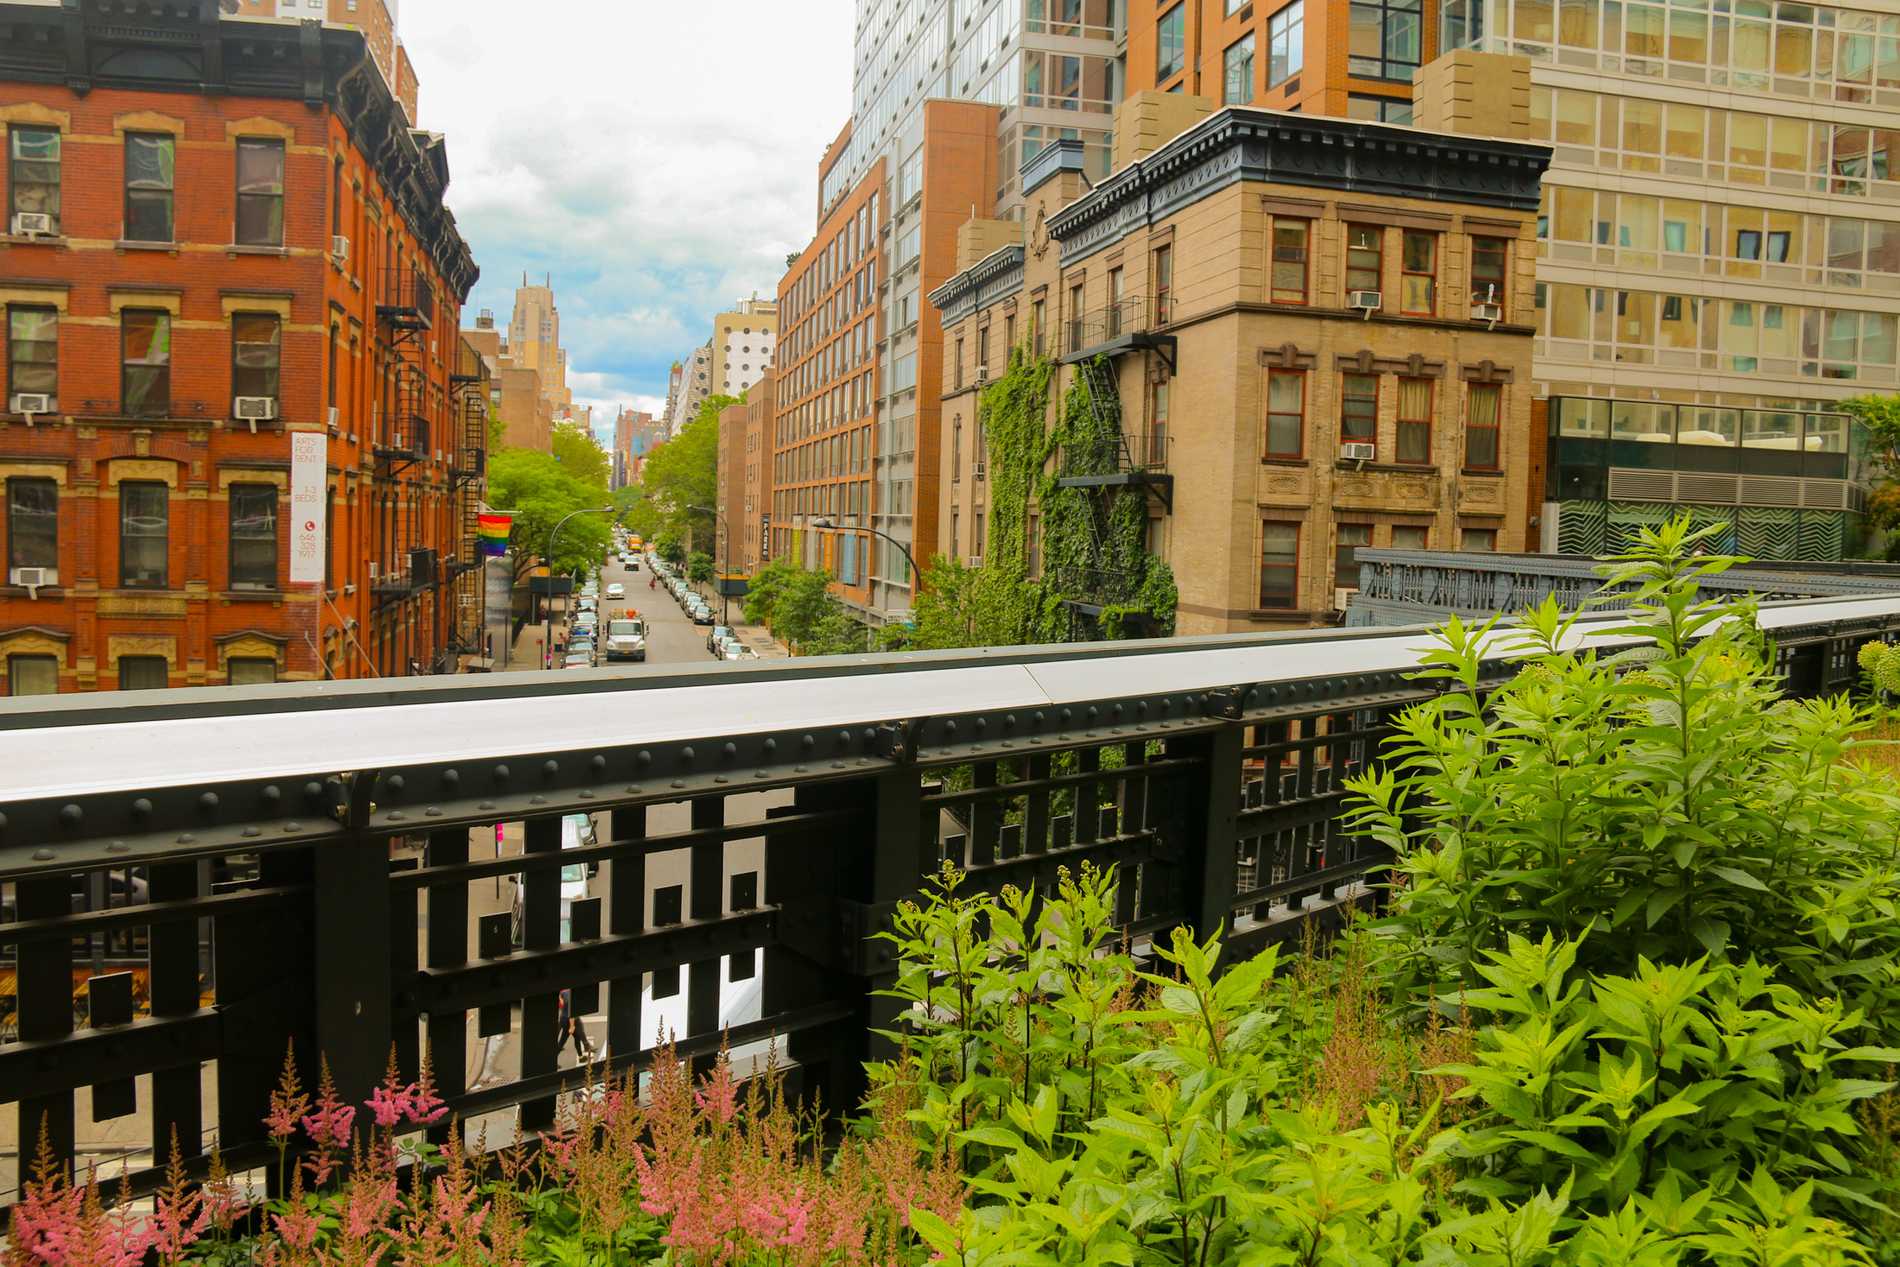 View of a New York City street with red brick buildings taken from the High Line crossing above.